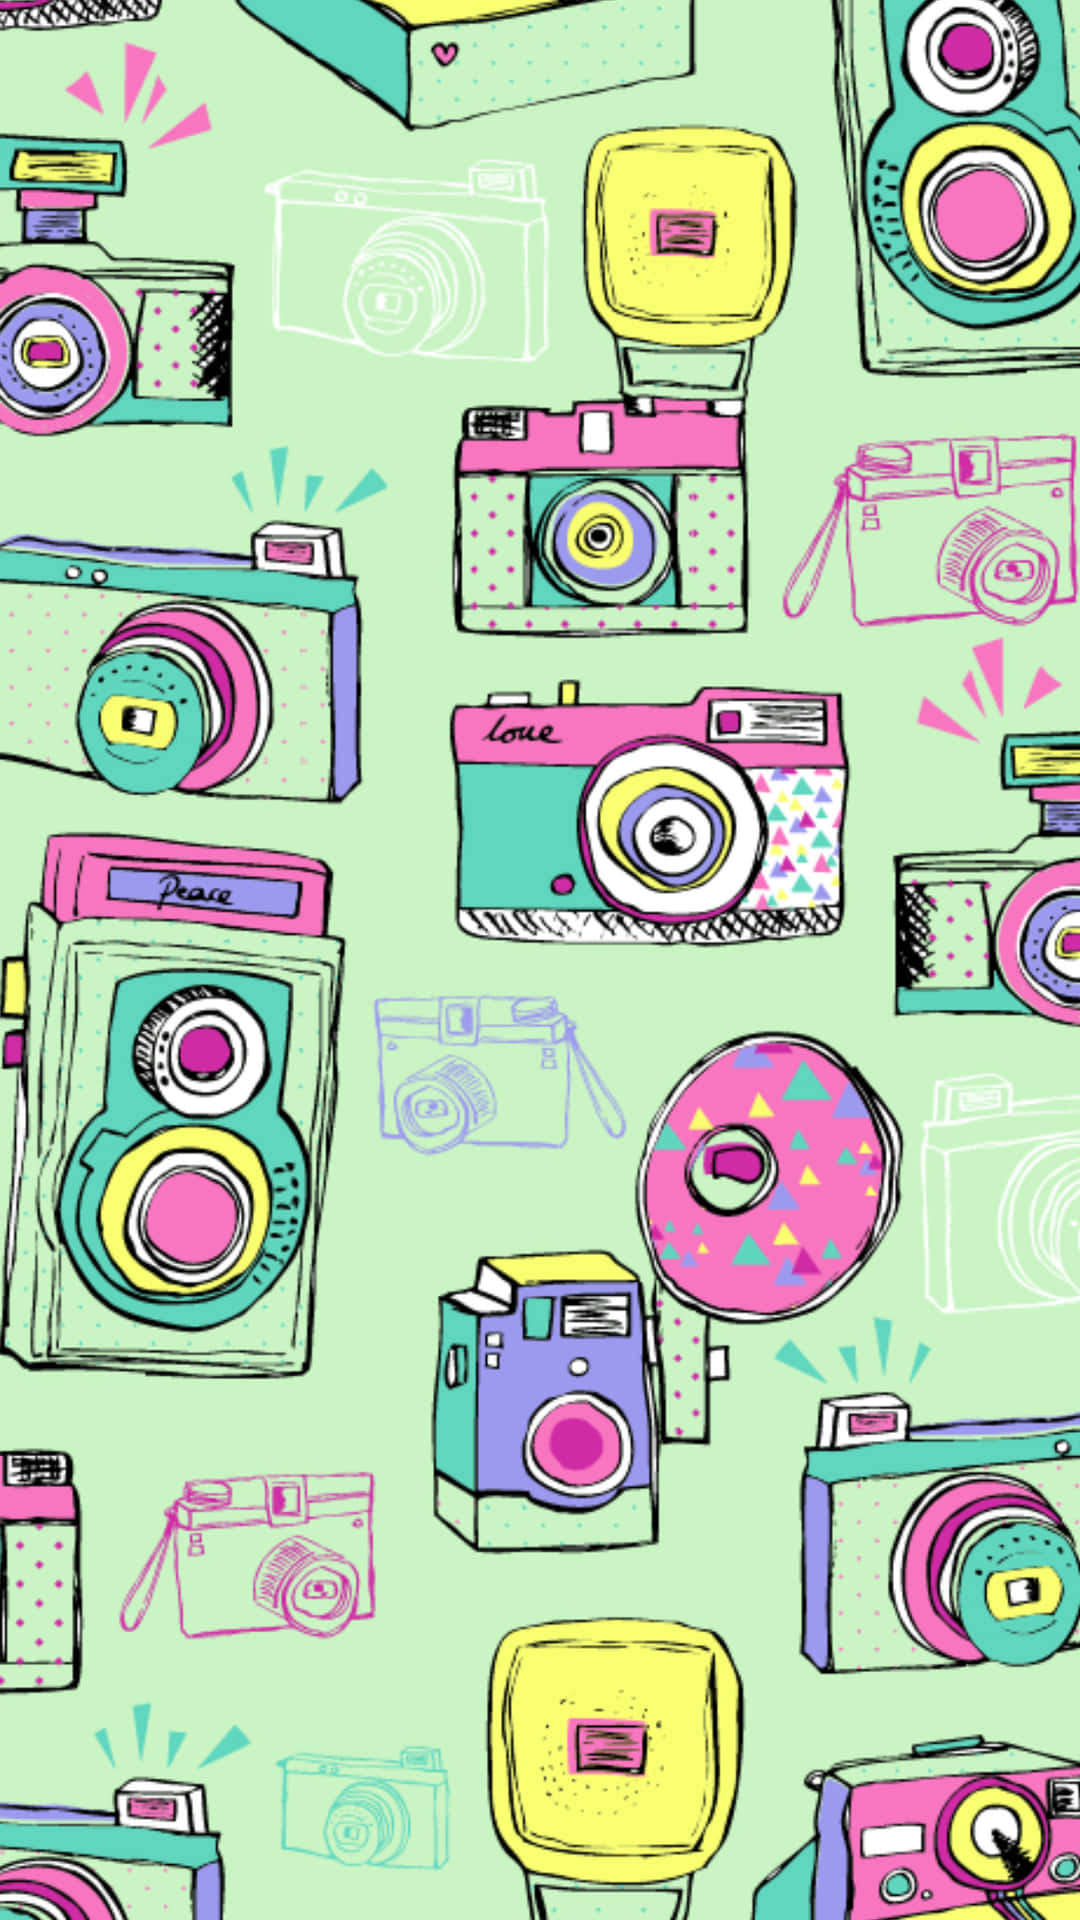 "Feel Artsy with this Cute iPhone Design" Wallpaper